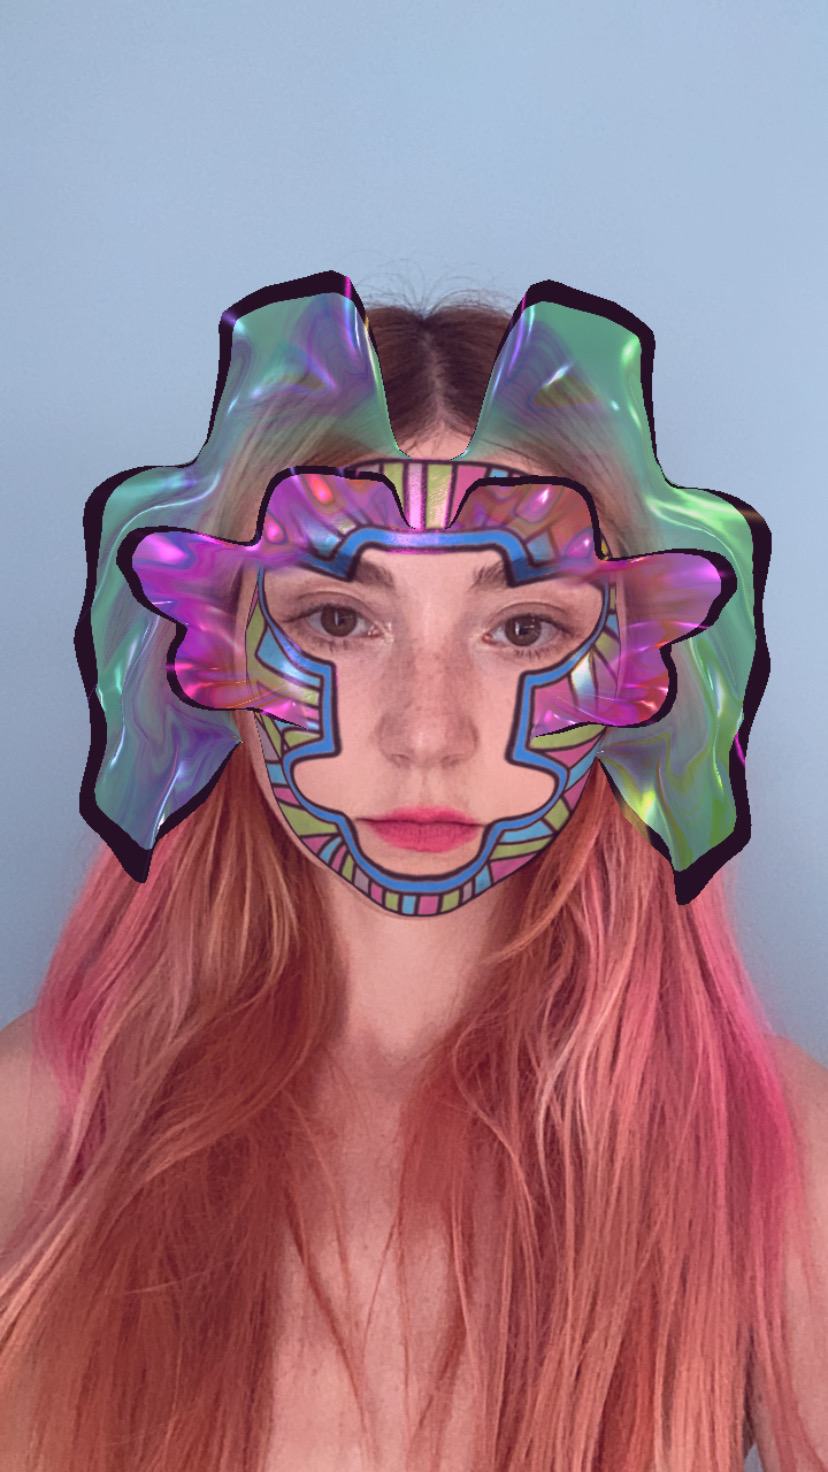 Ines Alpha and Madrona Redhawk’s face filter collaboration explores a unique intersection of beauty